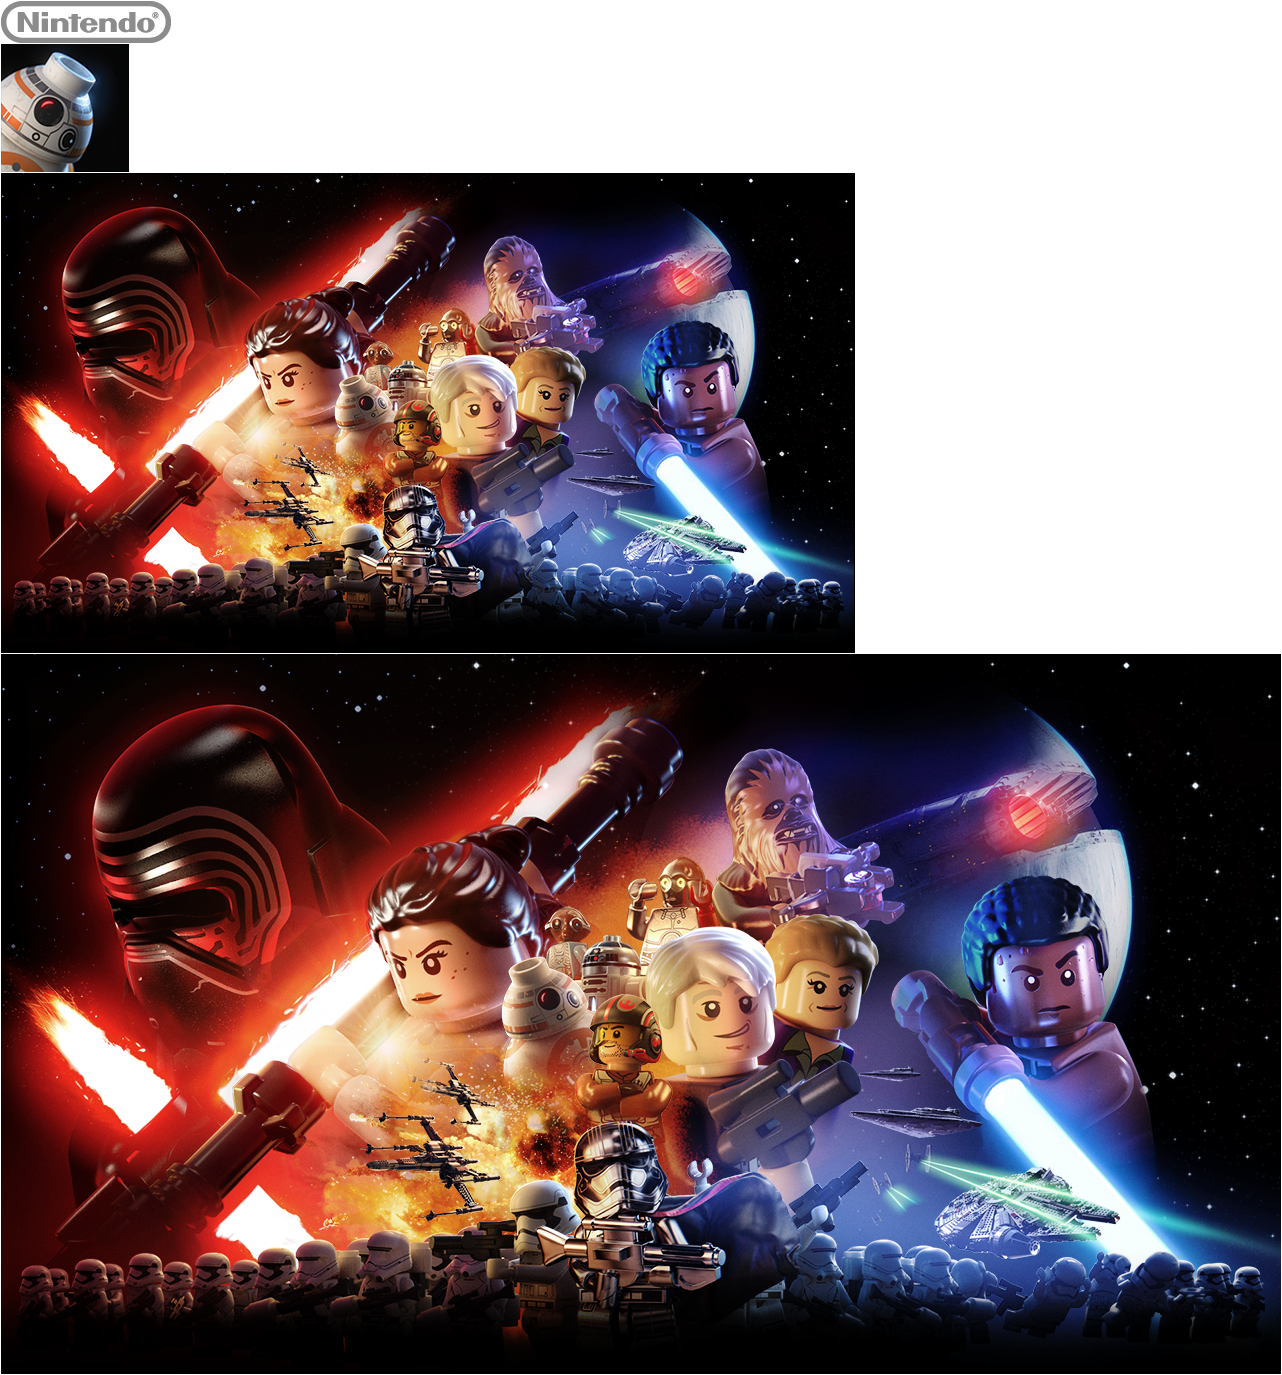 LEGO Star Wars: The Force Awakens - HOME Menu Icon & Banners